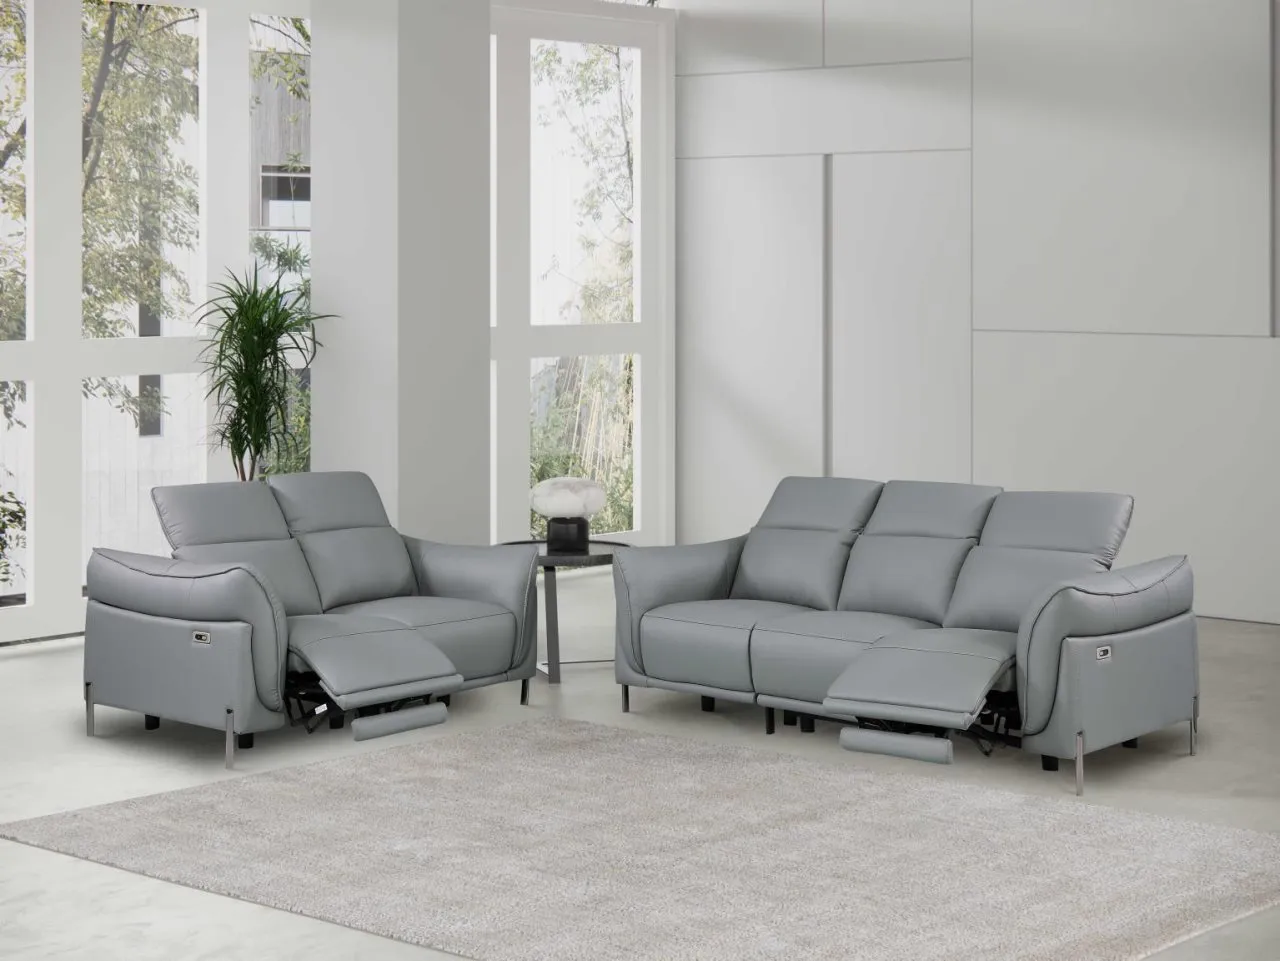 NASHVILLE GREY CONTEMPORARY SET WITH ONE-TOUCH RECLINING SOFA & LOVE SEAT